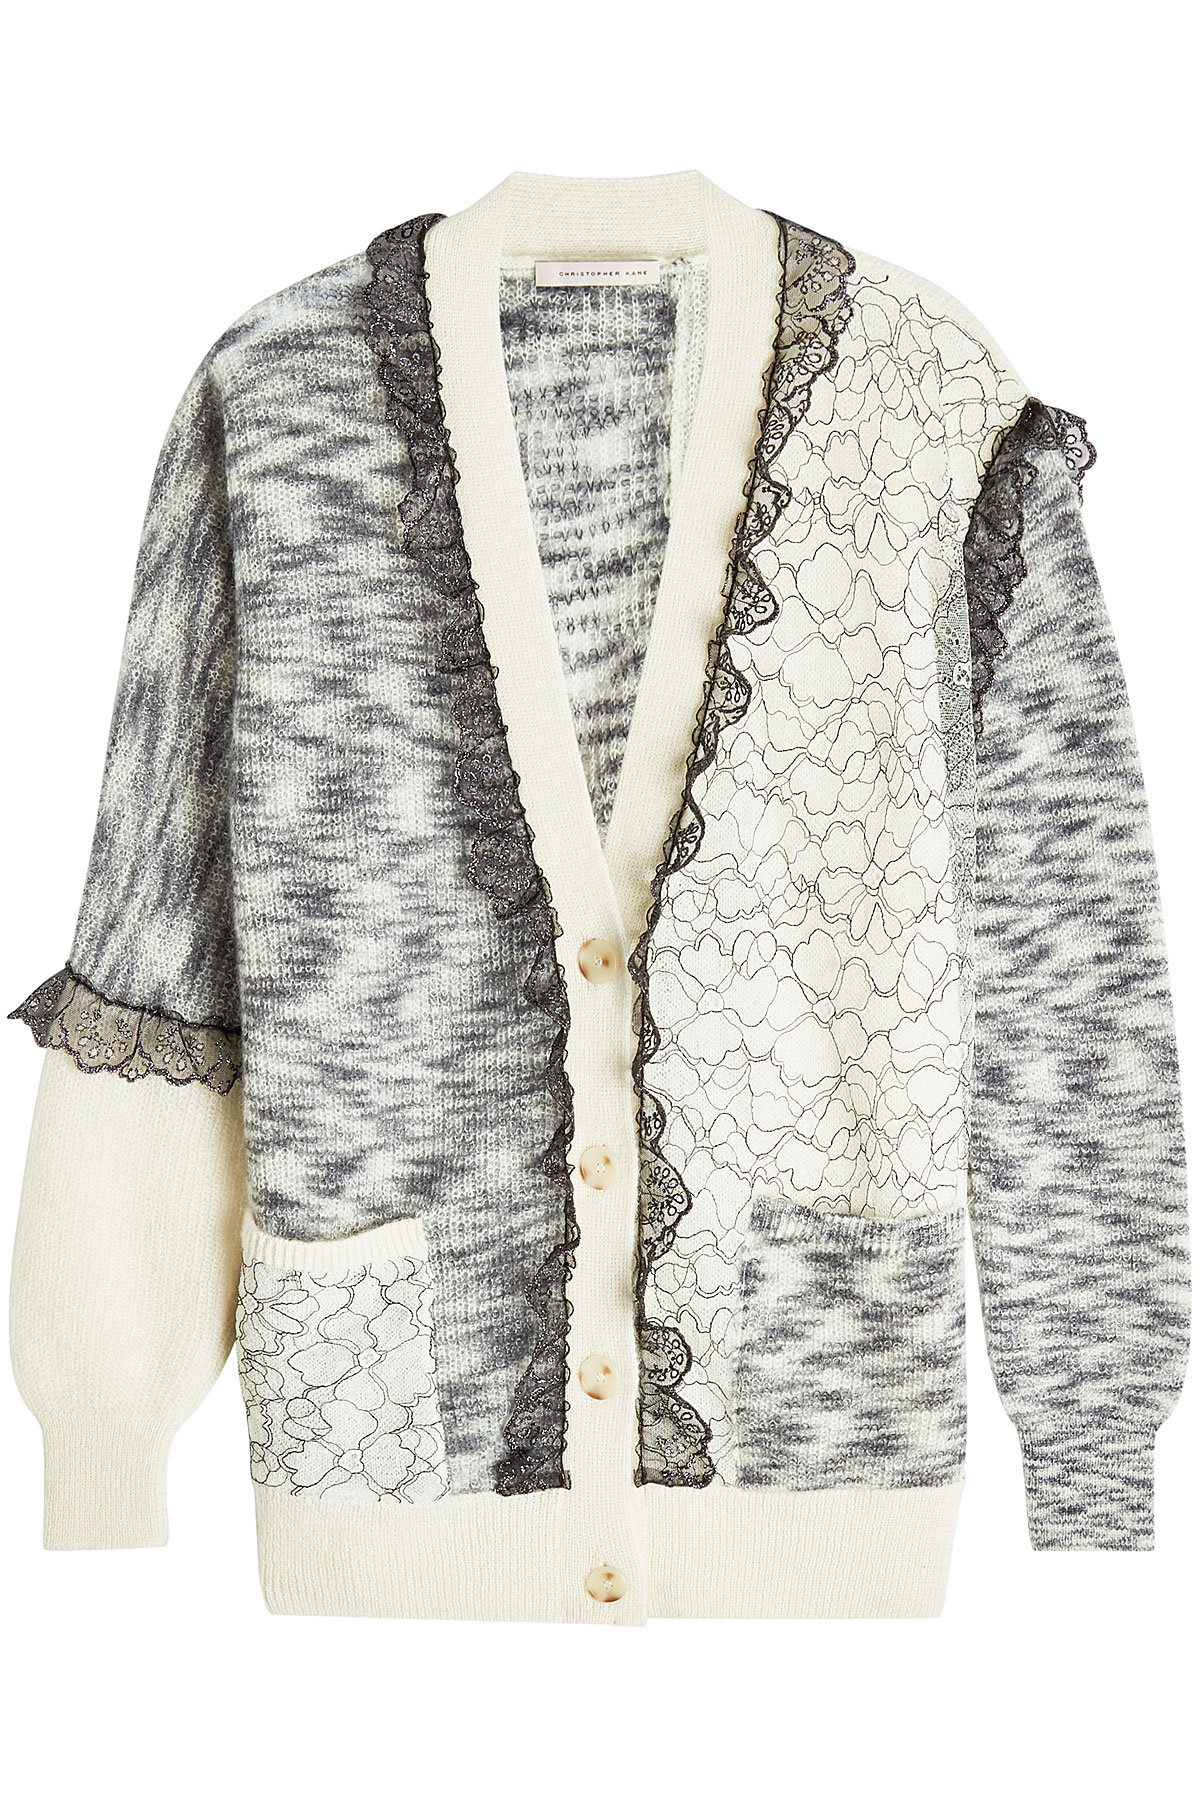 Christopher Kane - Patchwork Cardigan with Mohair, Wool and Lace